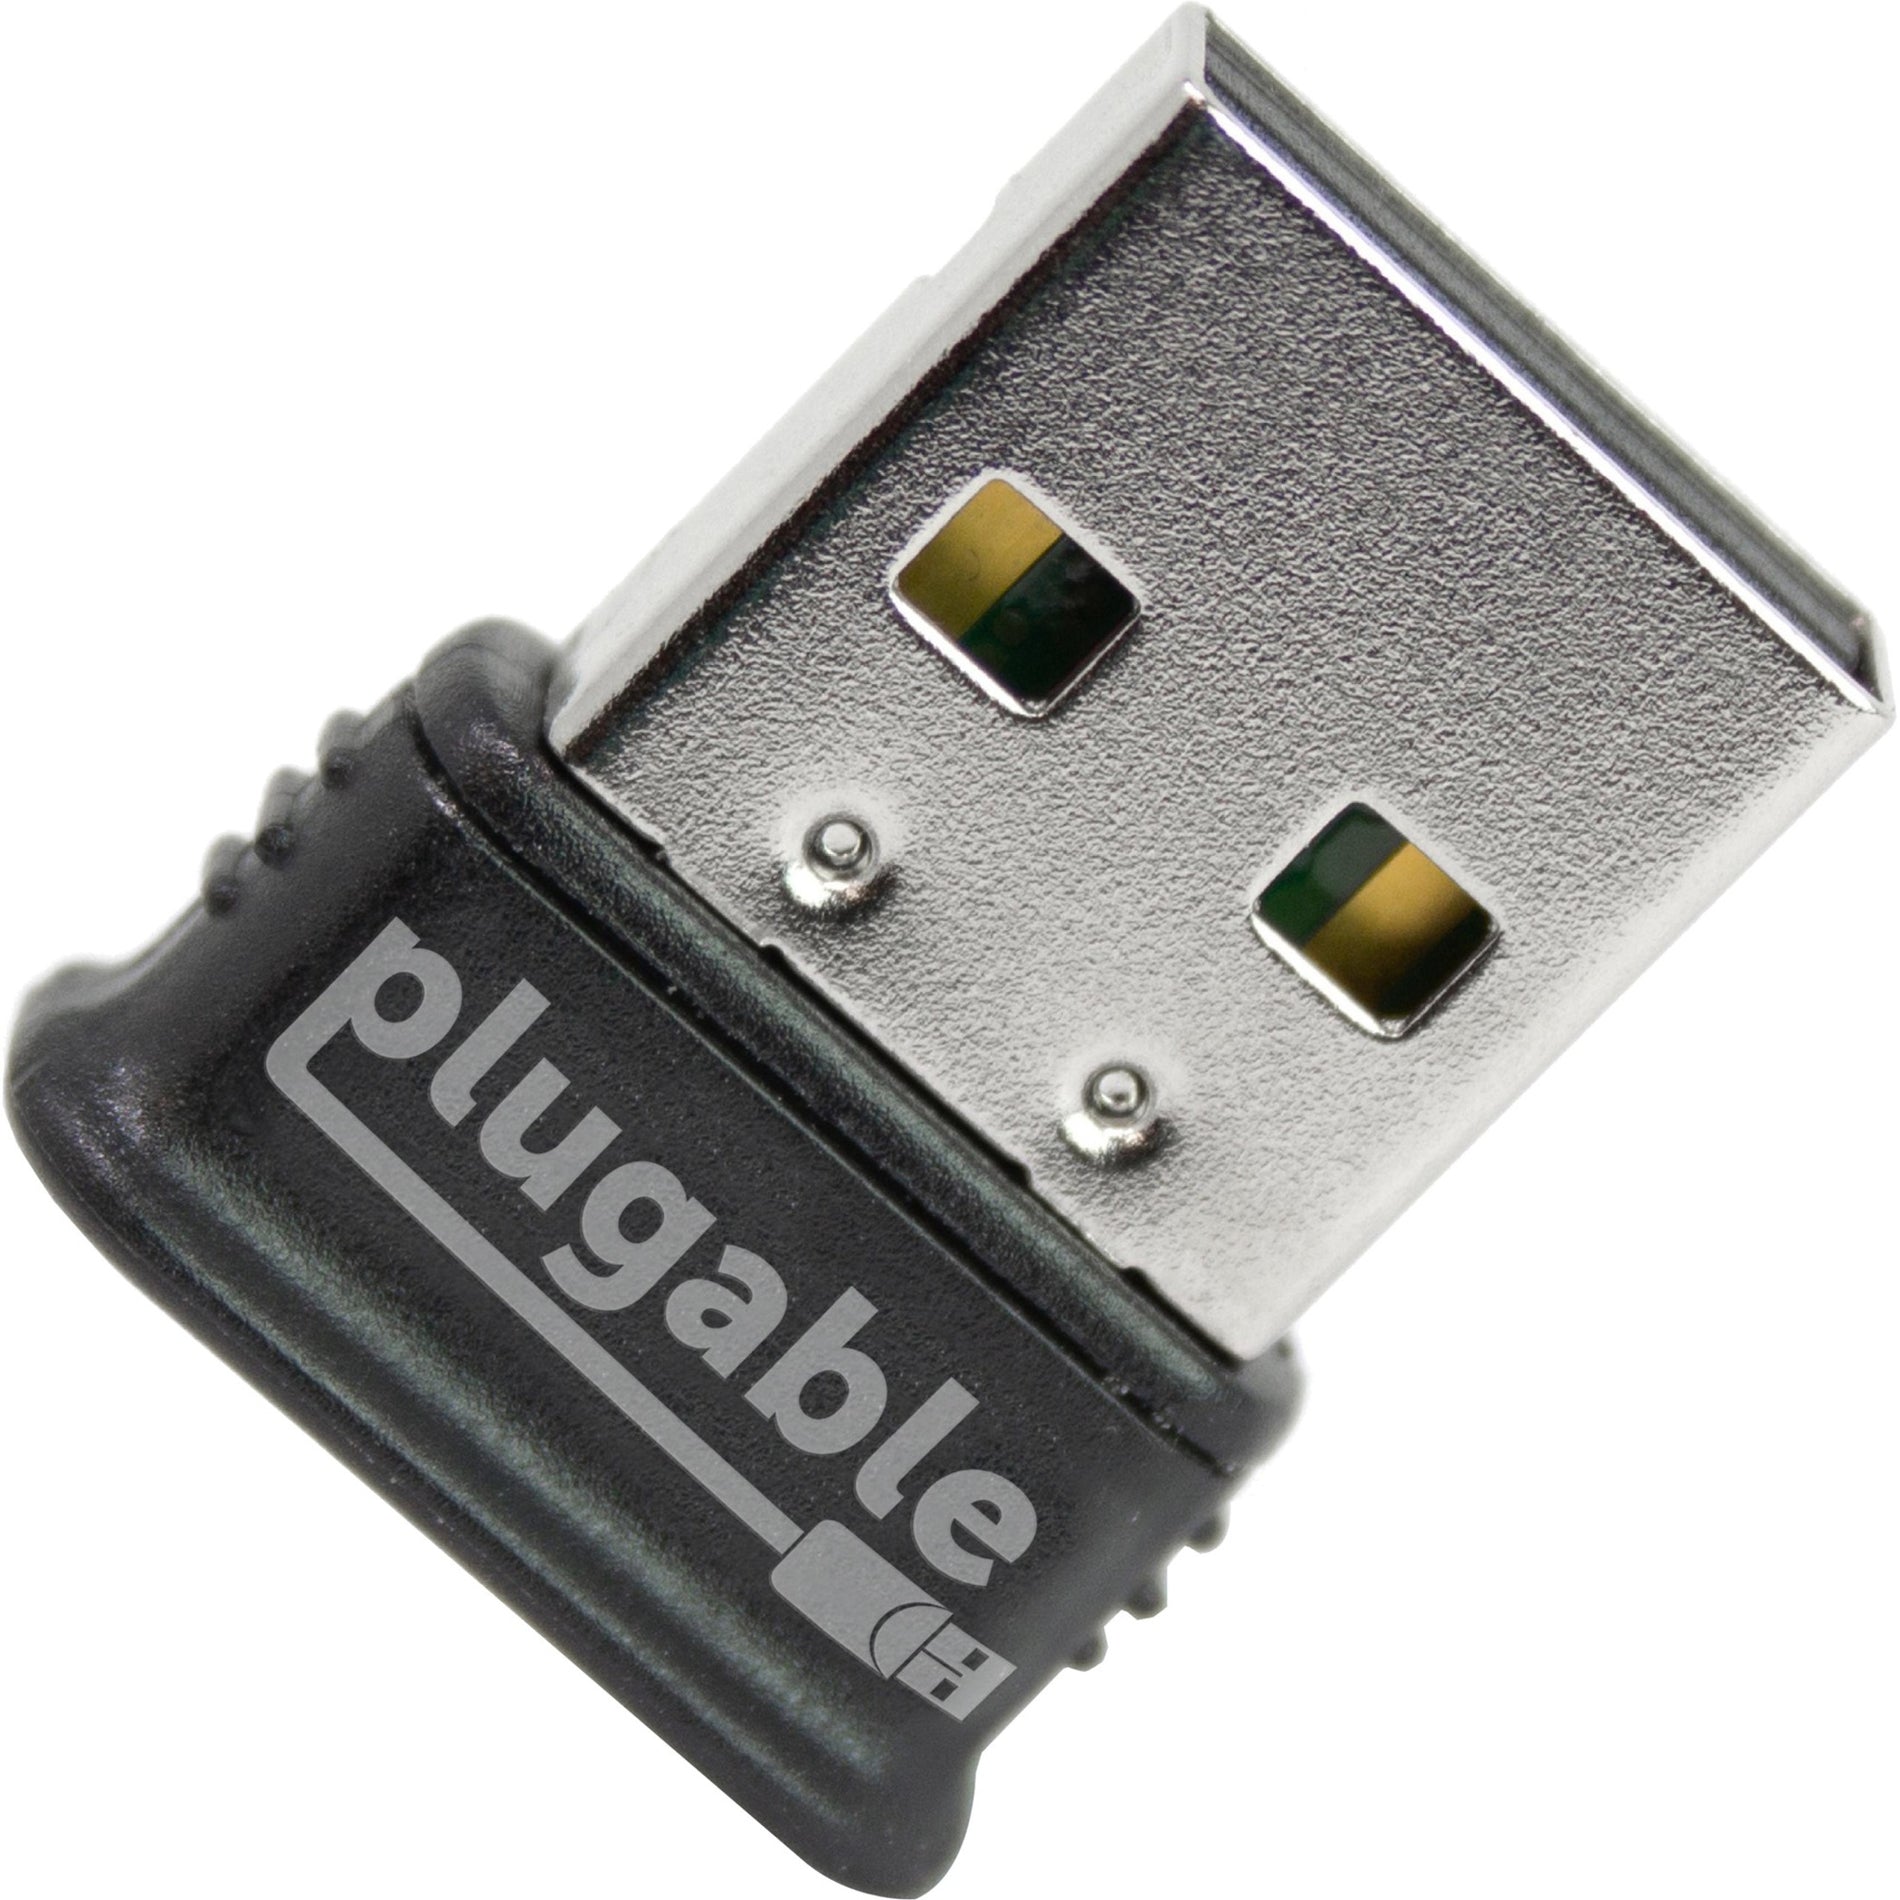 Plugable USB-BT4LE USB 2.0 Bluetooth Adapter Low Energy Micro Adapter